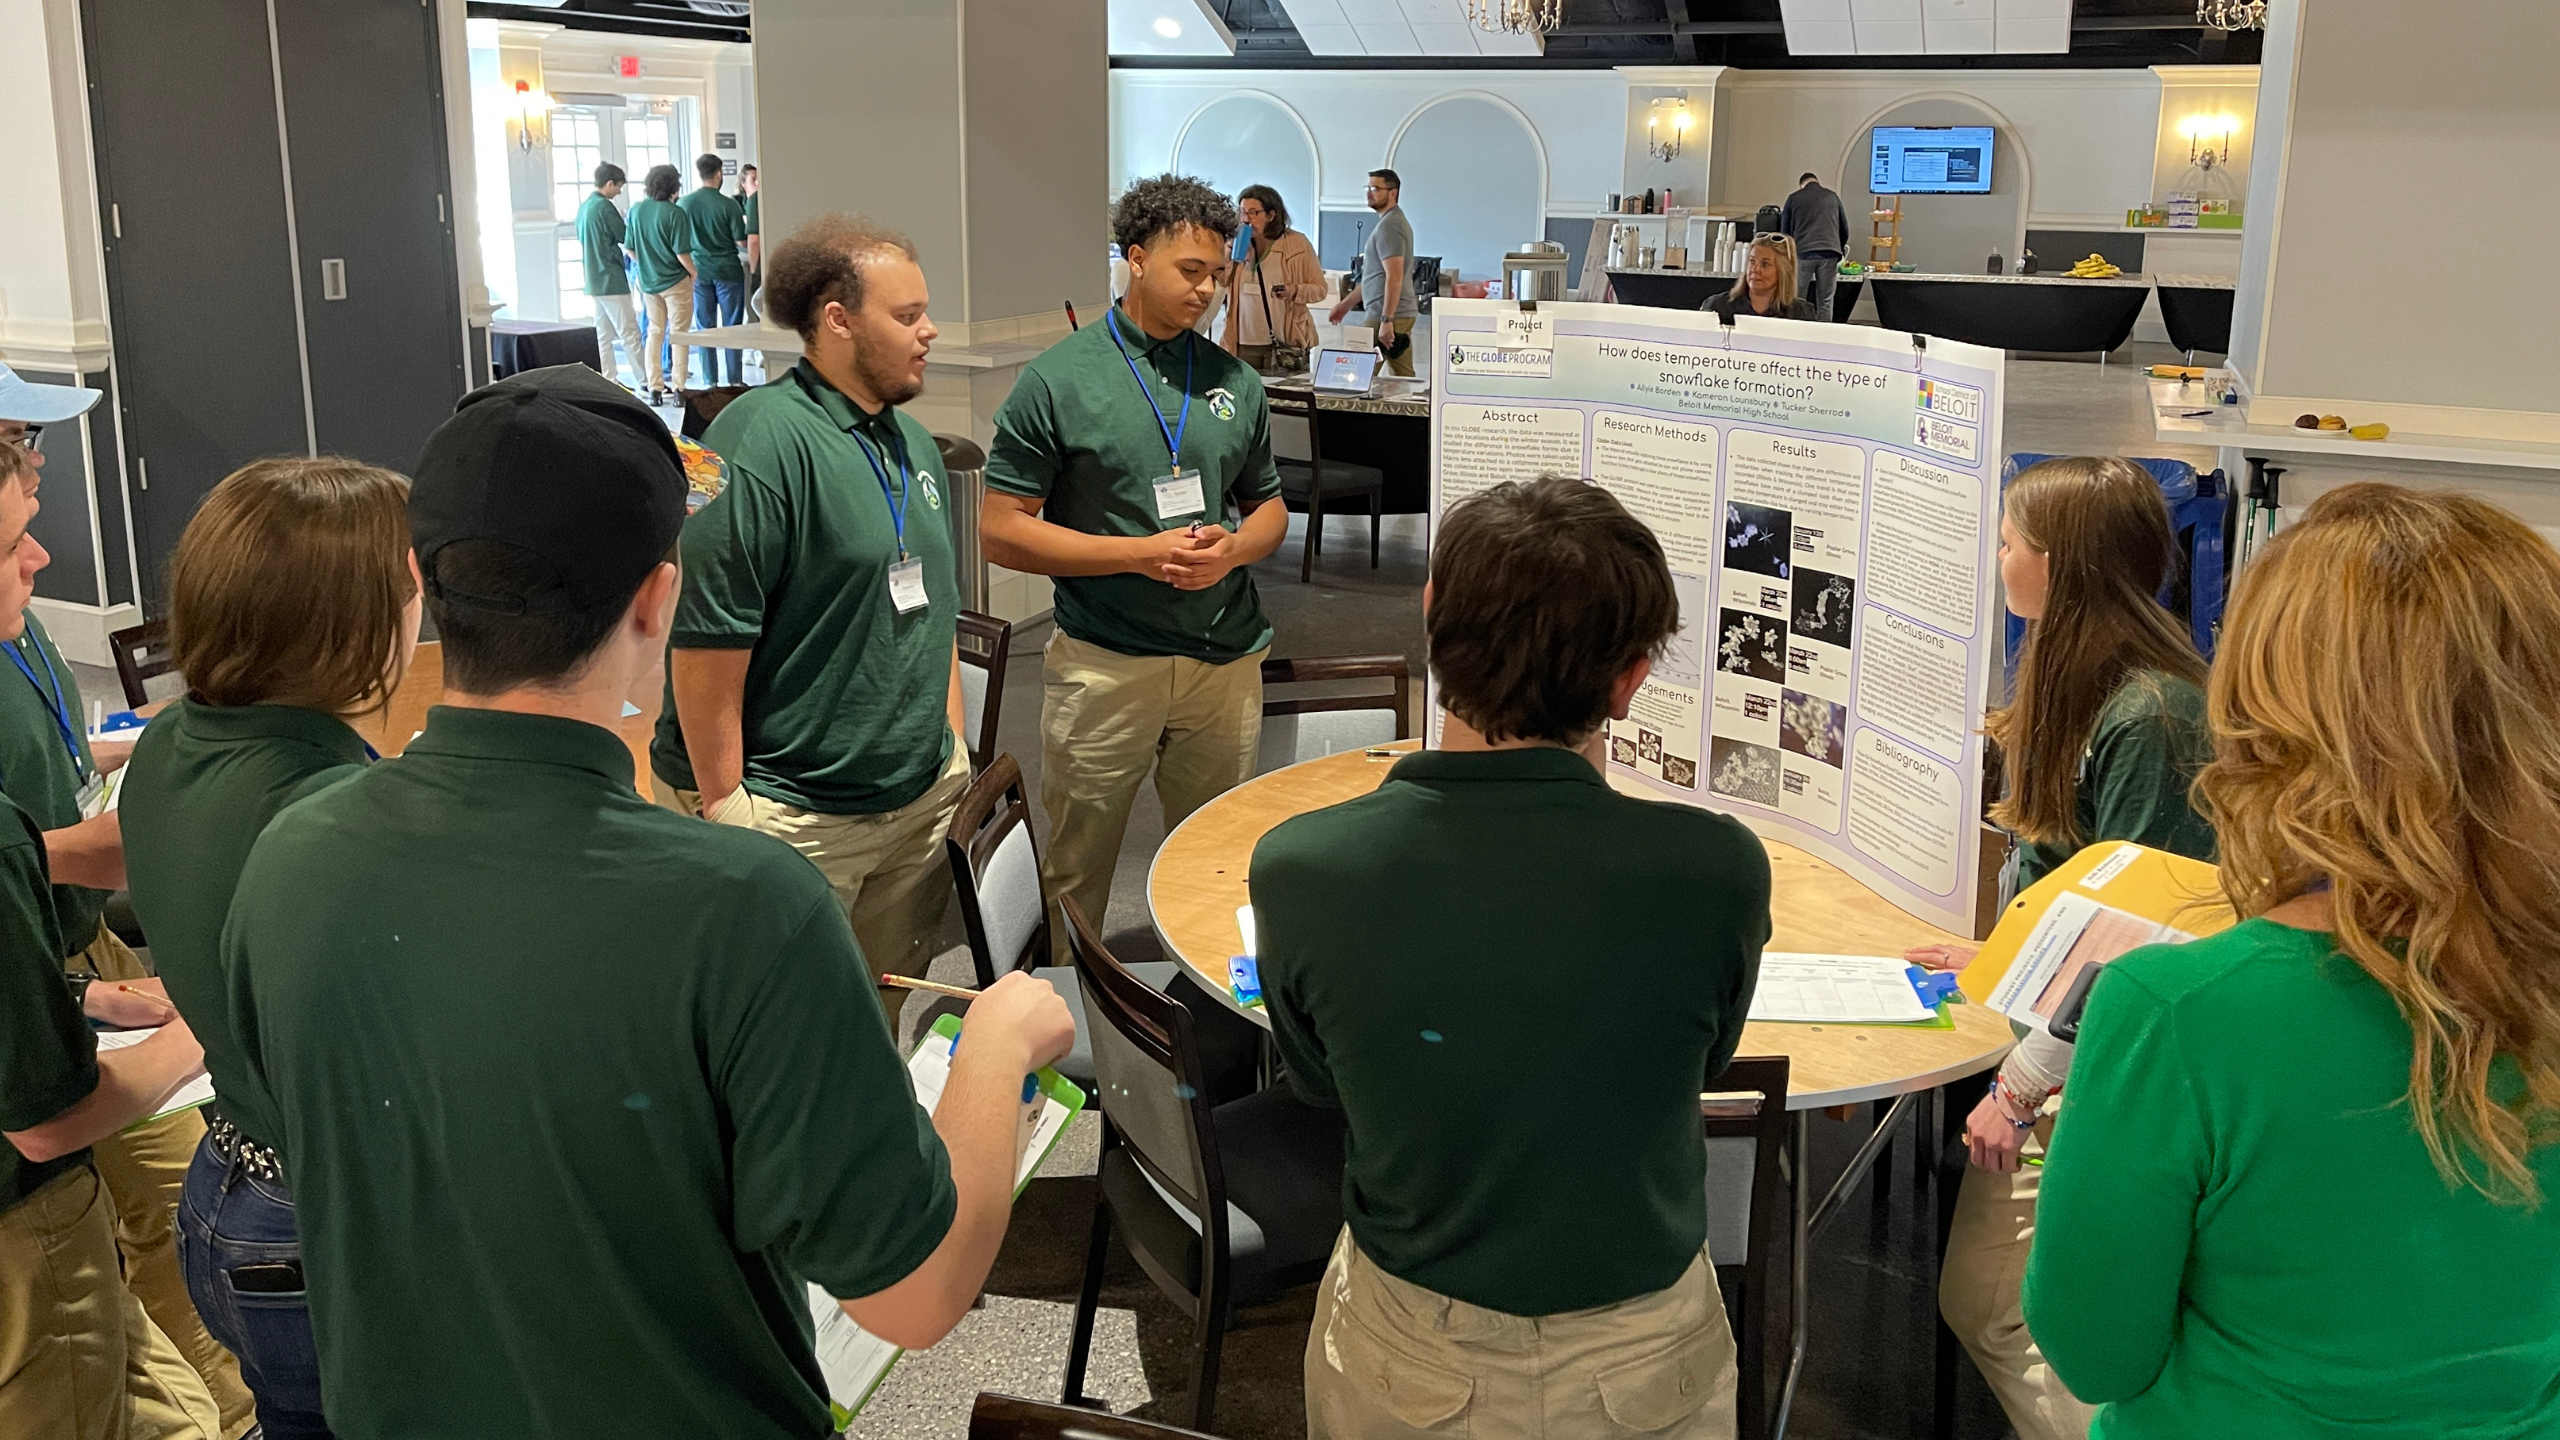 Students share their research with their peers during the poster session at the Midwest Student Research Symposium